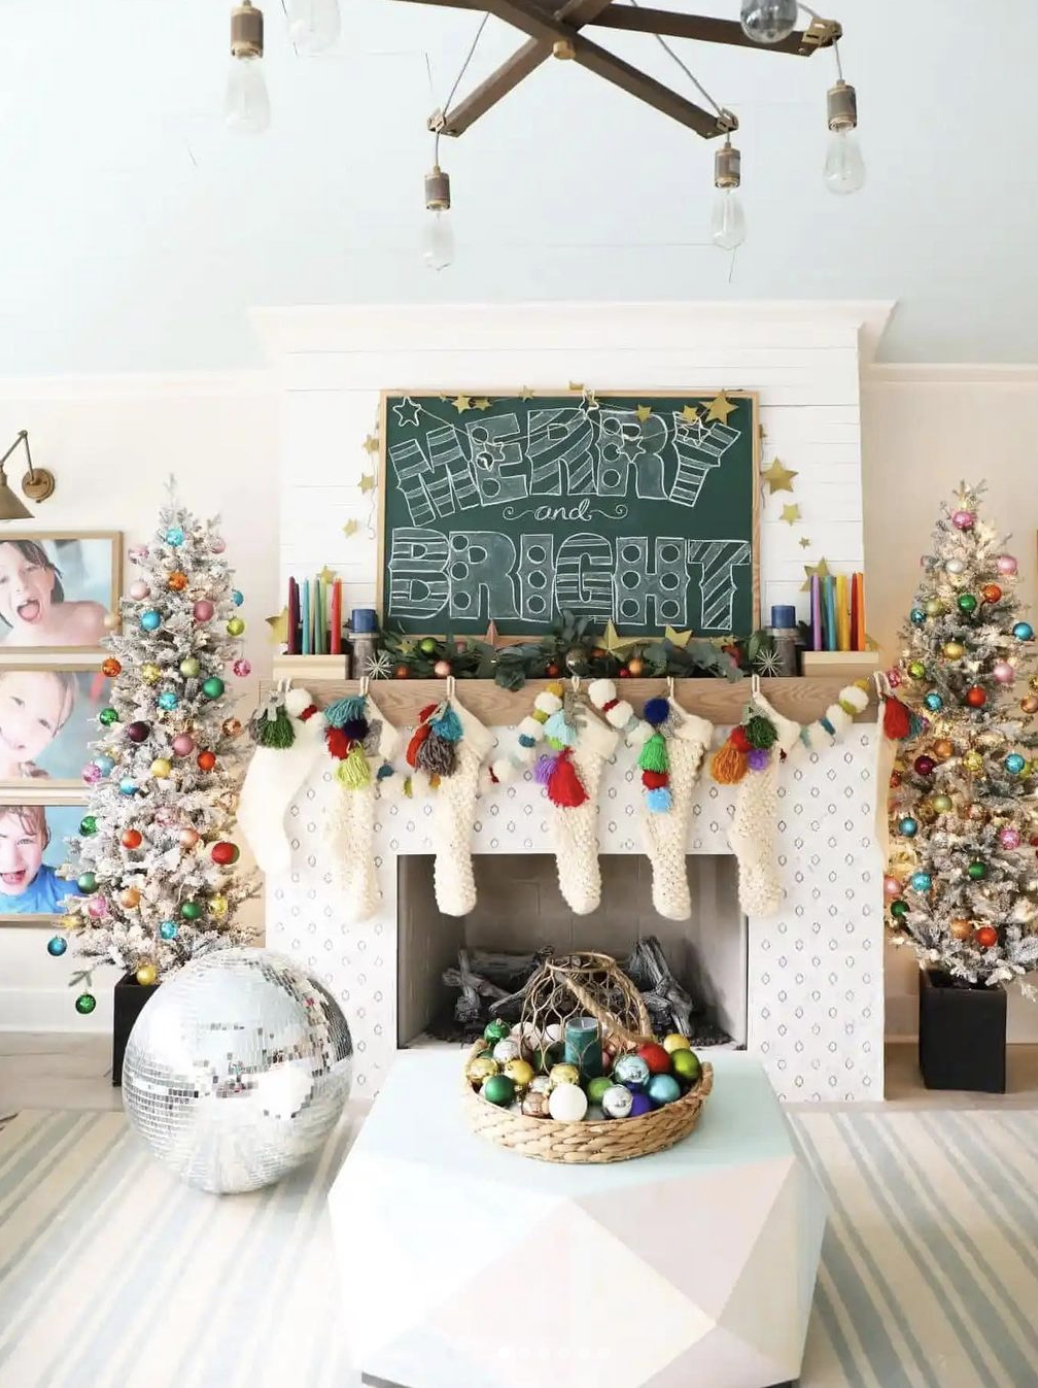 Merry and Bright Chalkboard Christmas mantel